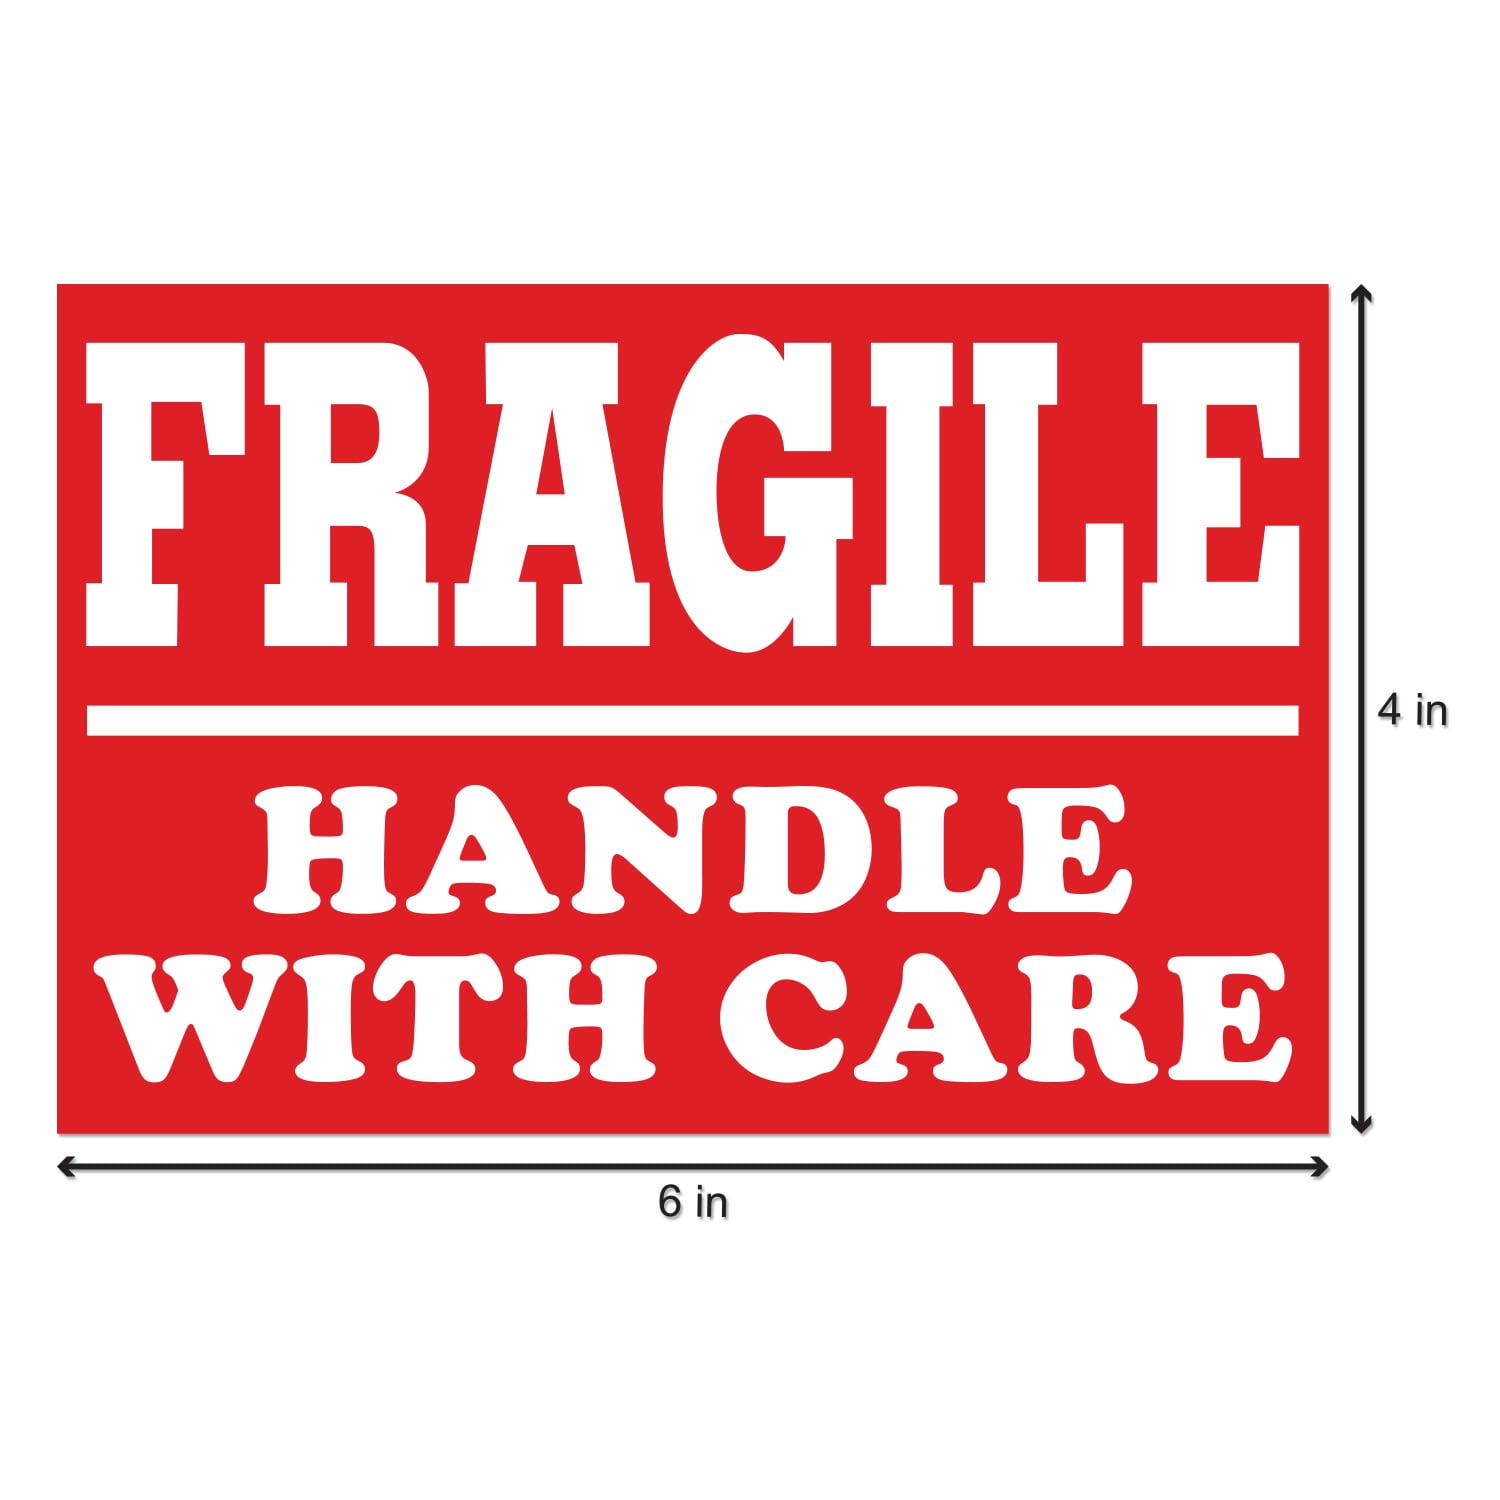 Details about   Fragile Handle With Care Small labels Stickers 38mm x 21mm 